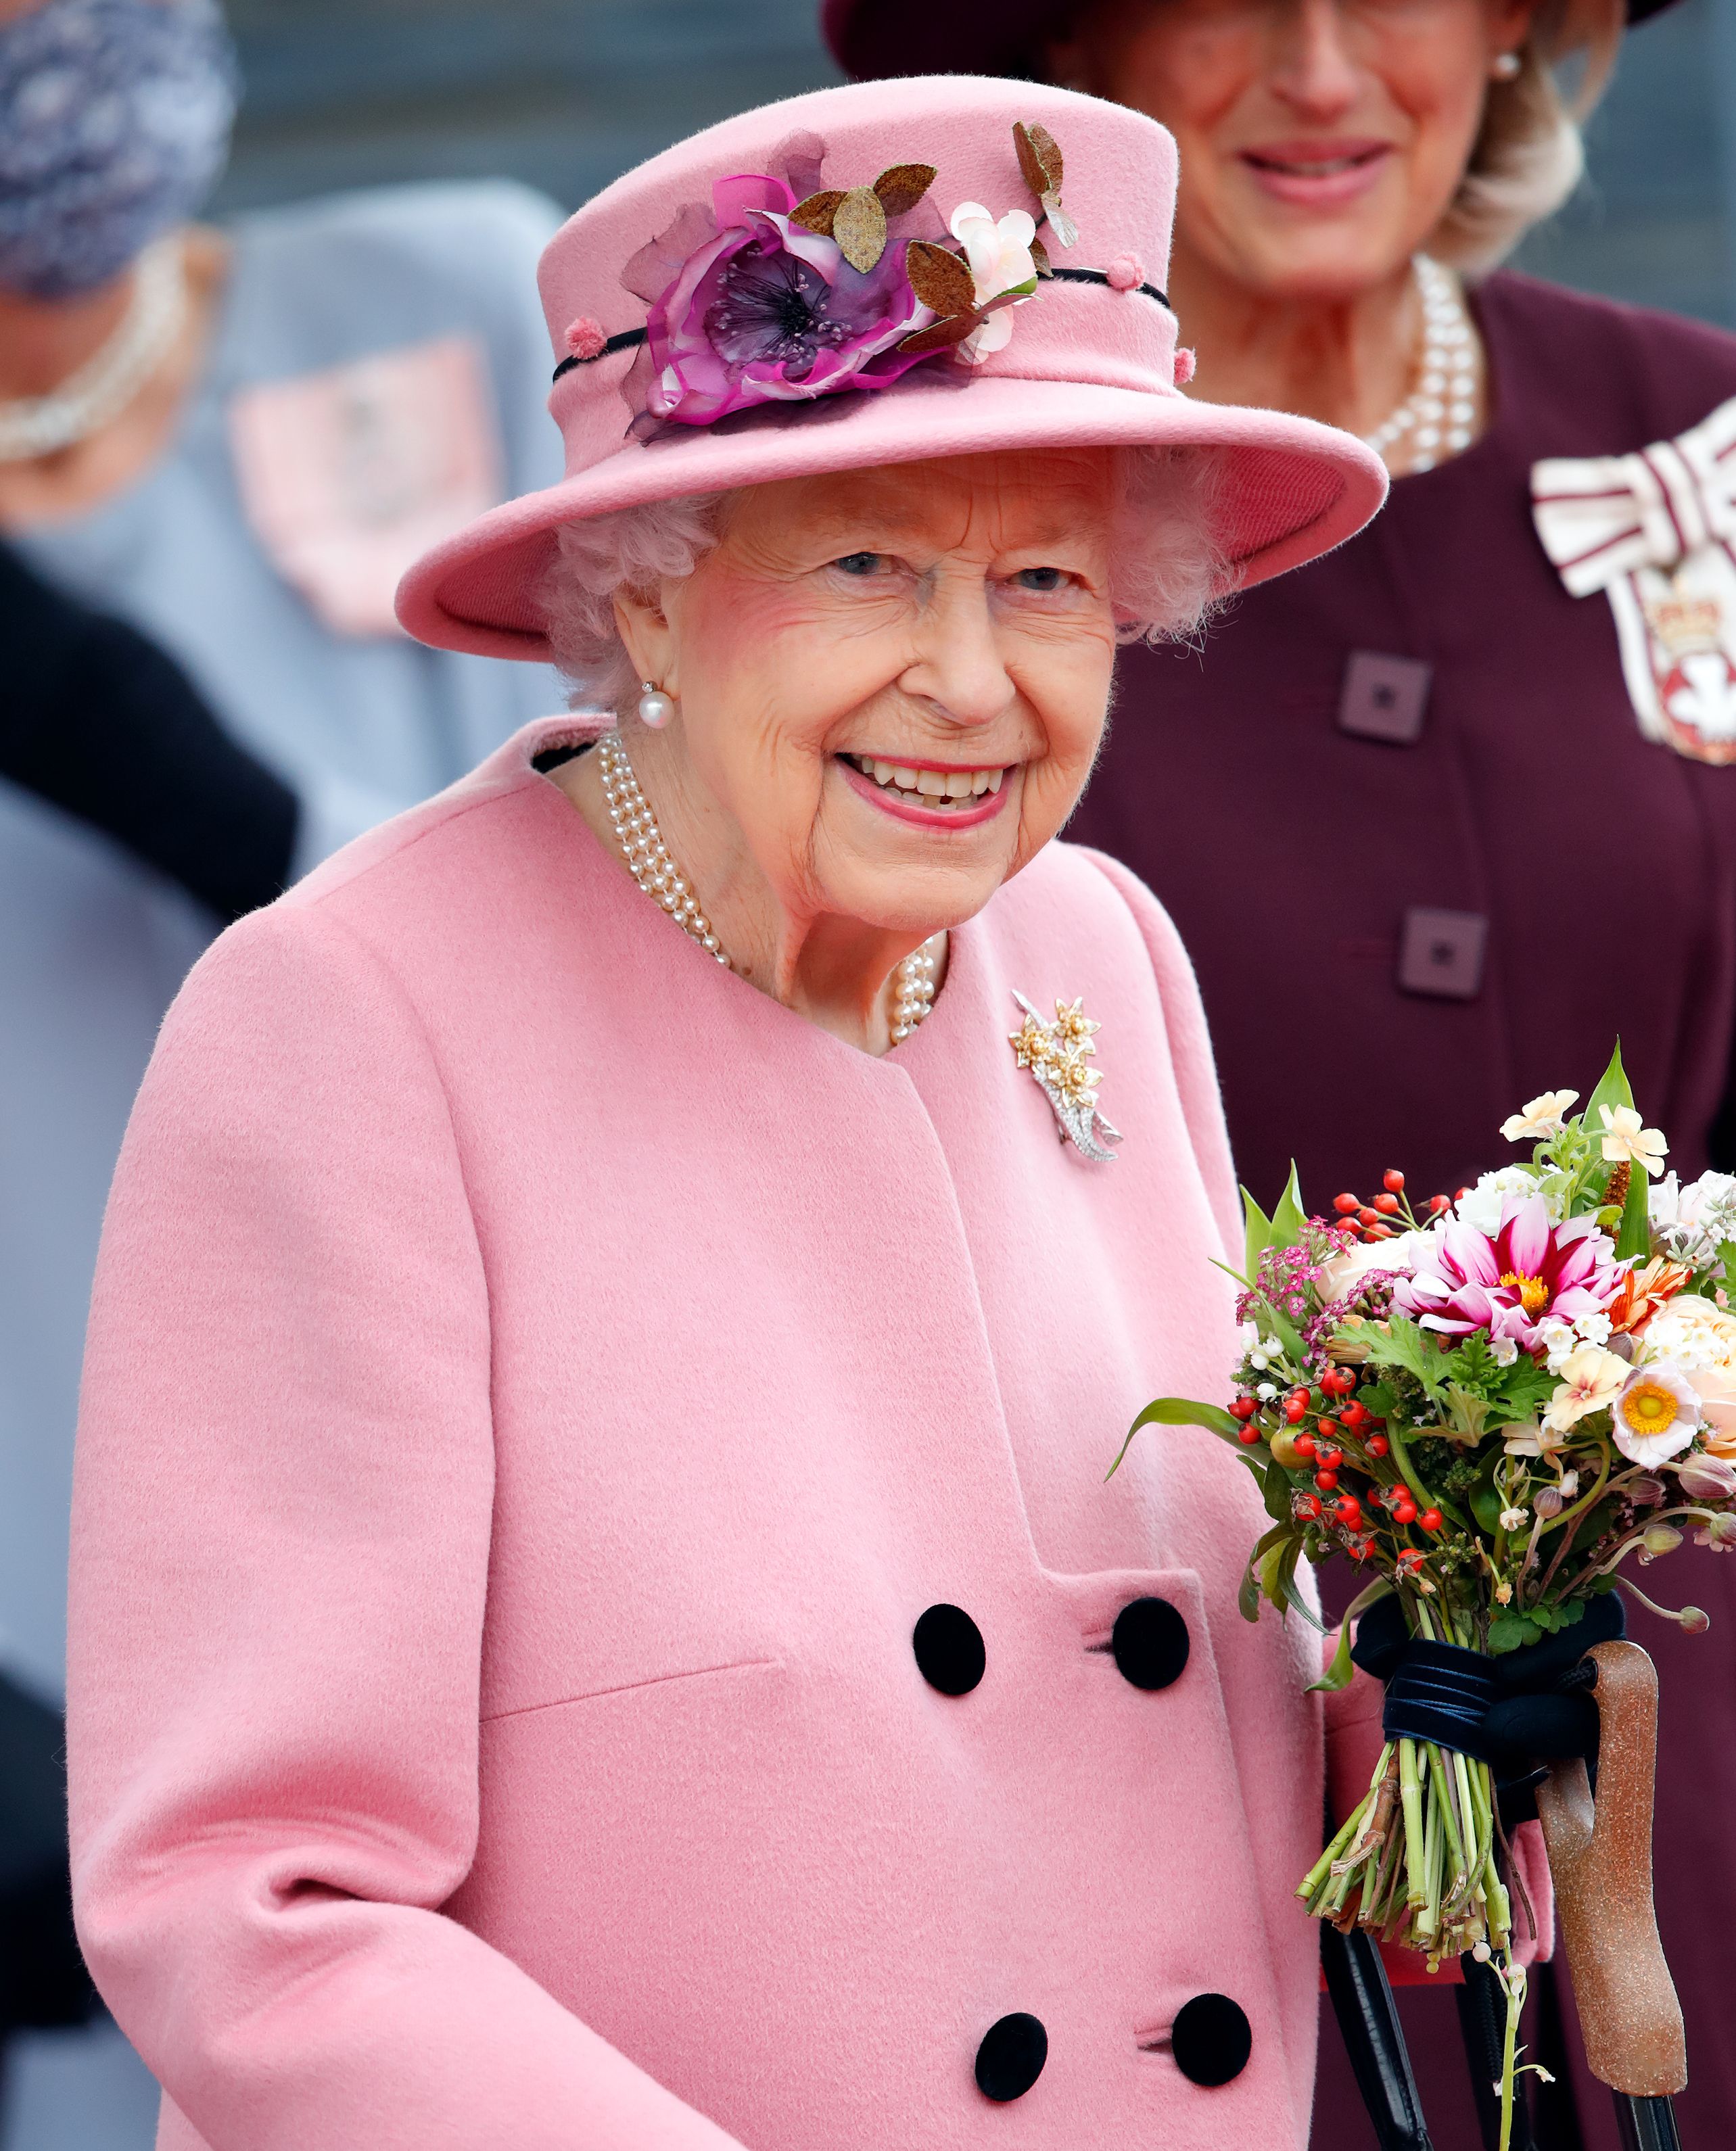 Queen Elizabeth to Receive New Prime Minister at Balmoral